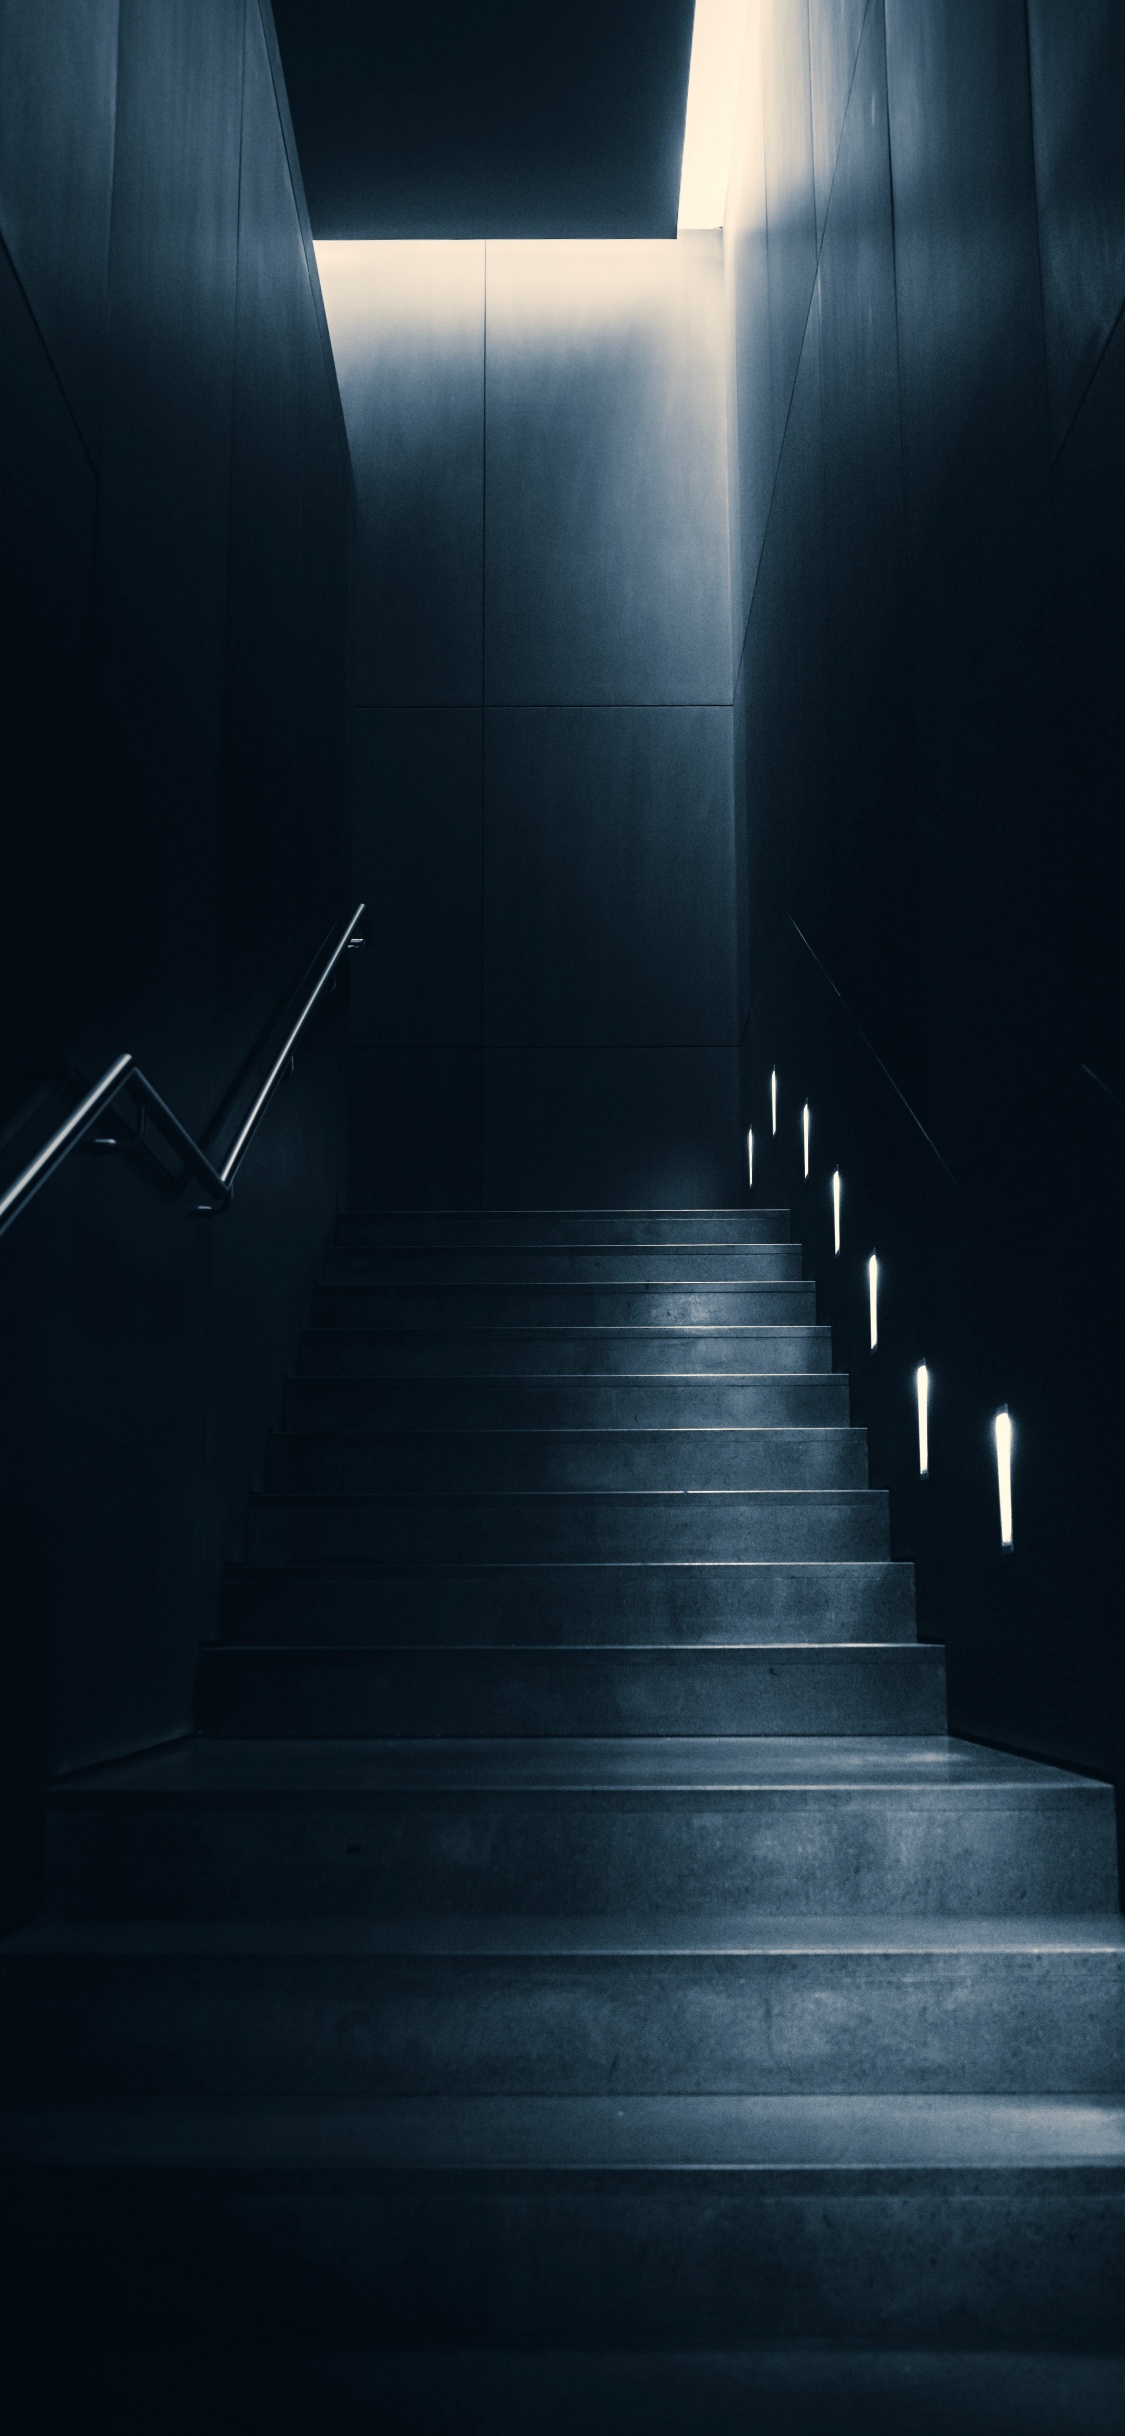 Gray Concrete Staircase With Black Metal Railings. Wallpaper in 1125x2436 Resolution